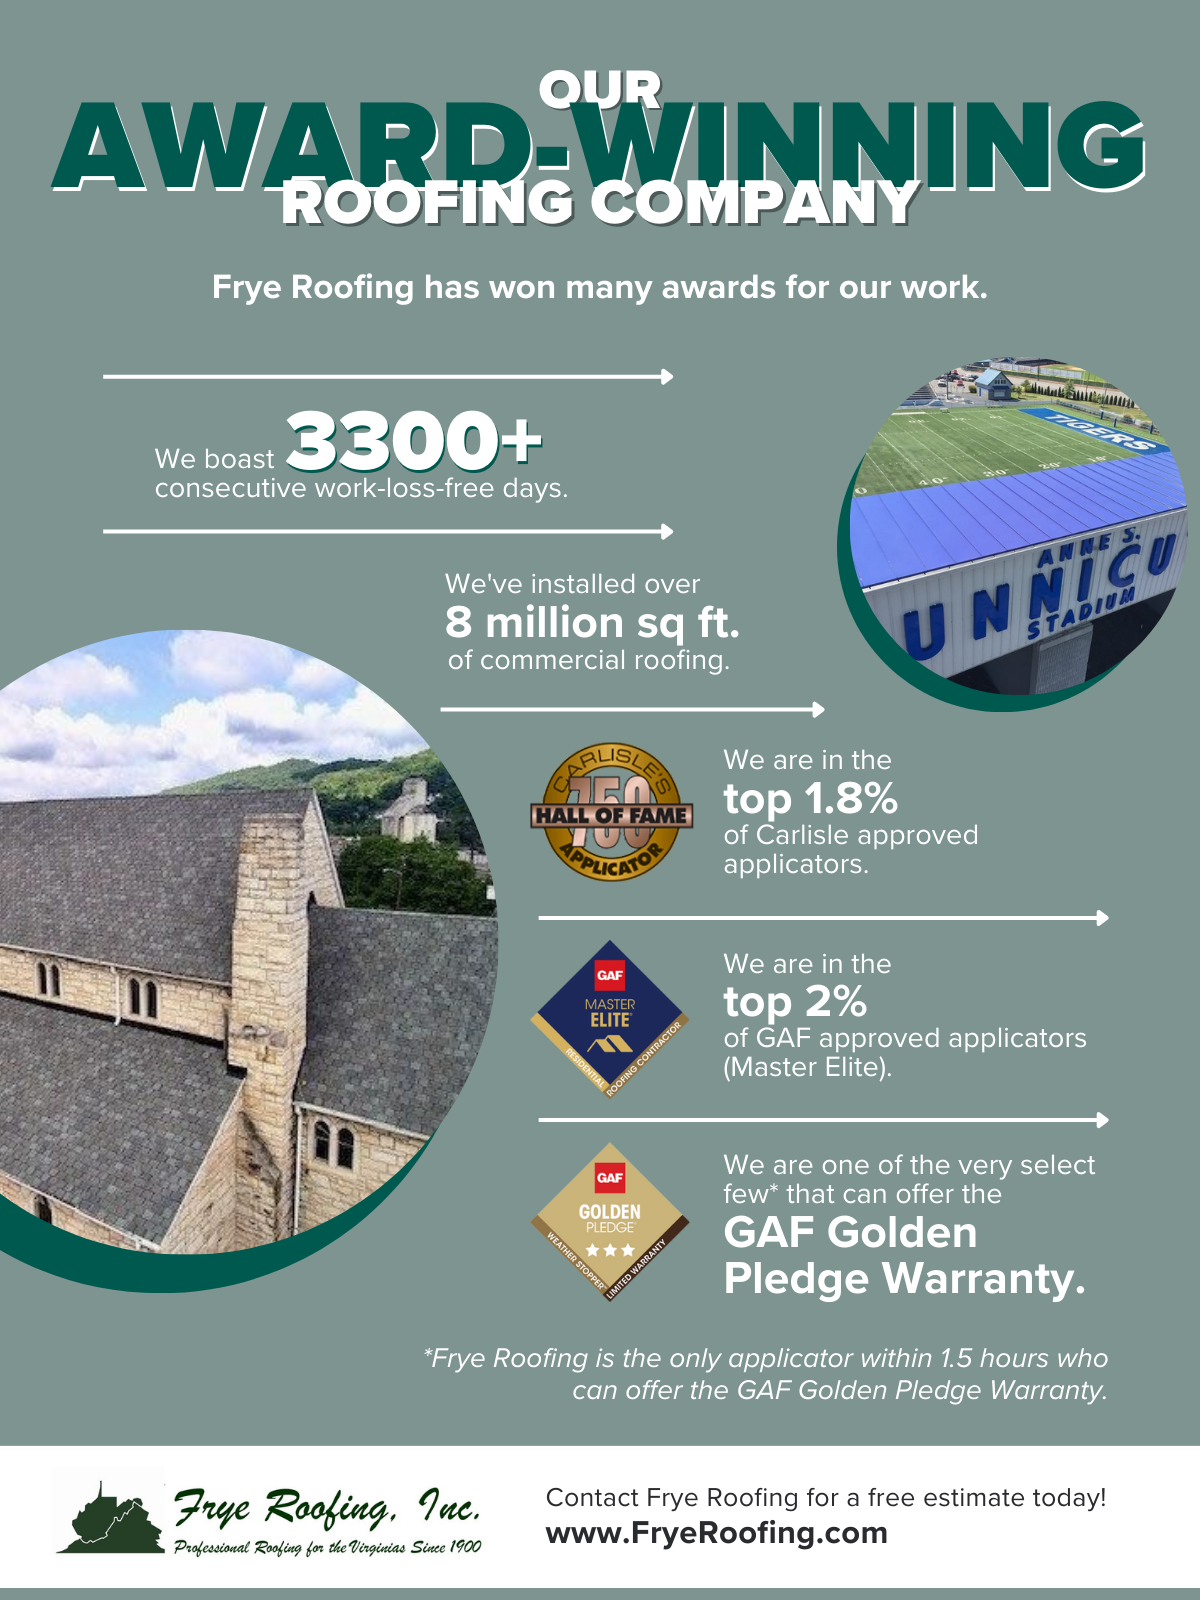 M38249 - Frye Roofing Inc. Infographic Our Award-Winning Roofing Company (1).png